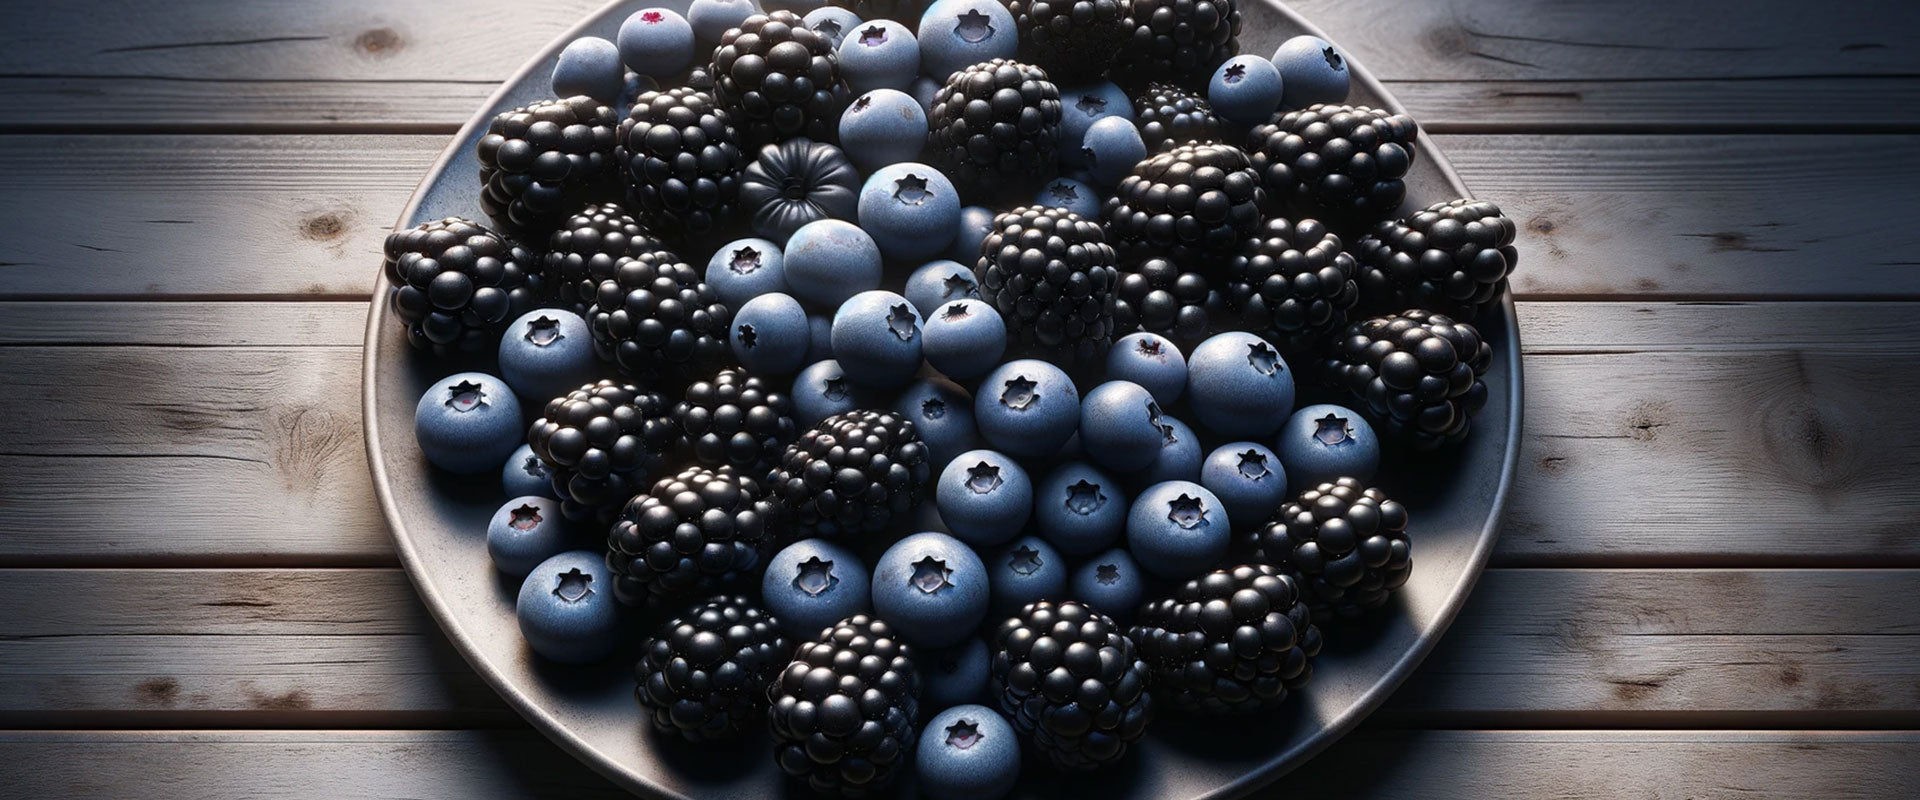 blueberries and blackberries for natural purple food coloring